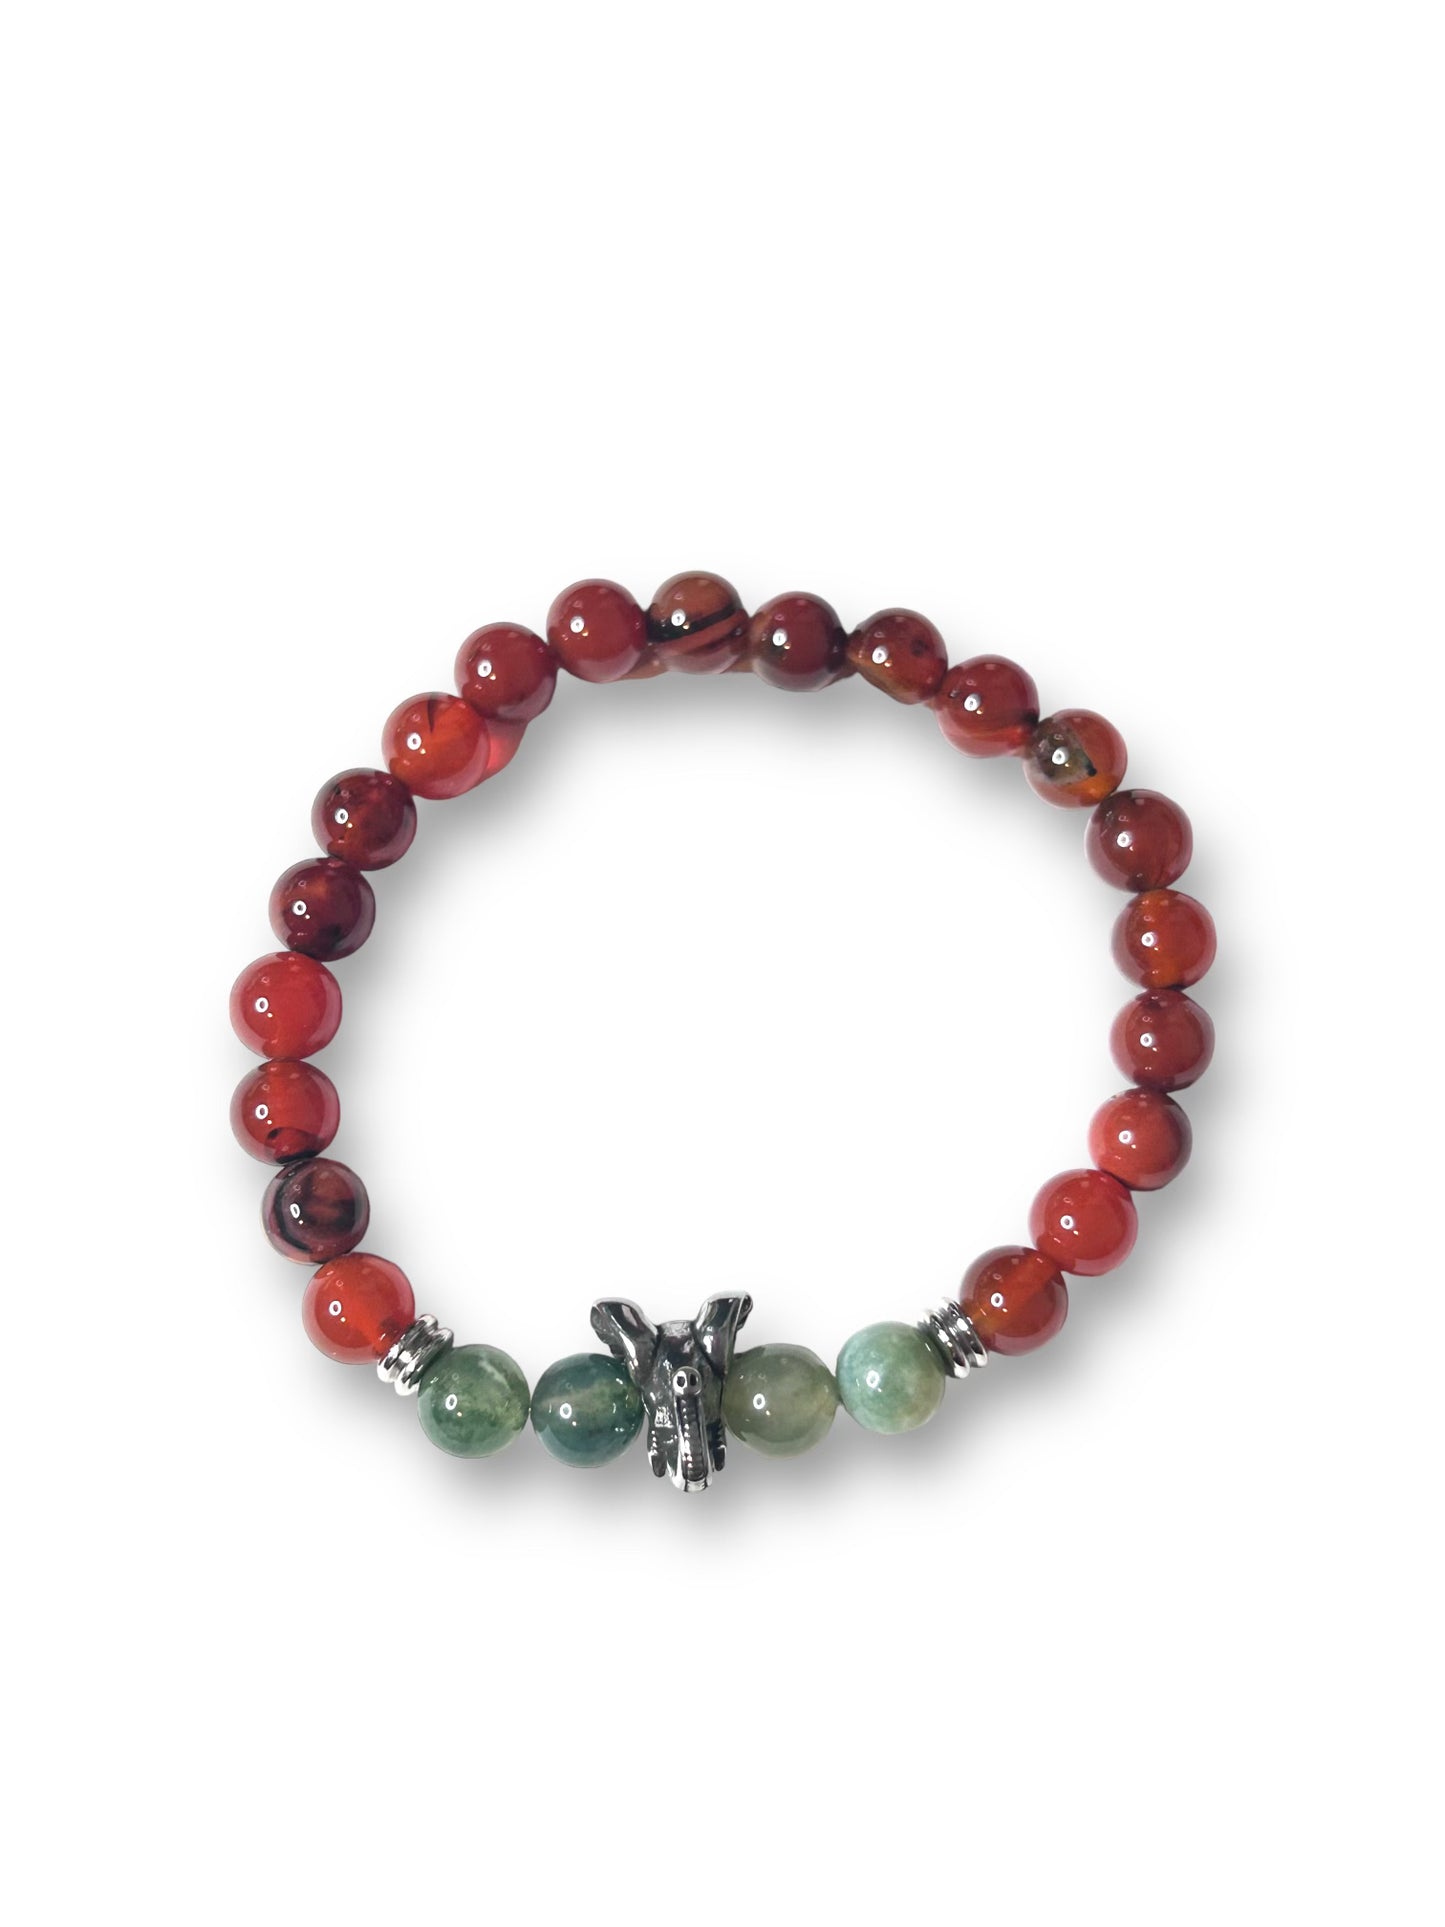 Silver Elephant Head Bracelet with Red and Green Beads - A Powerful Symbol of Strength, Wisdom, and Good Luck